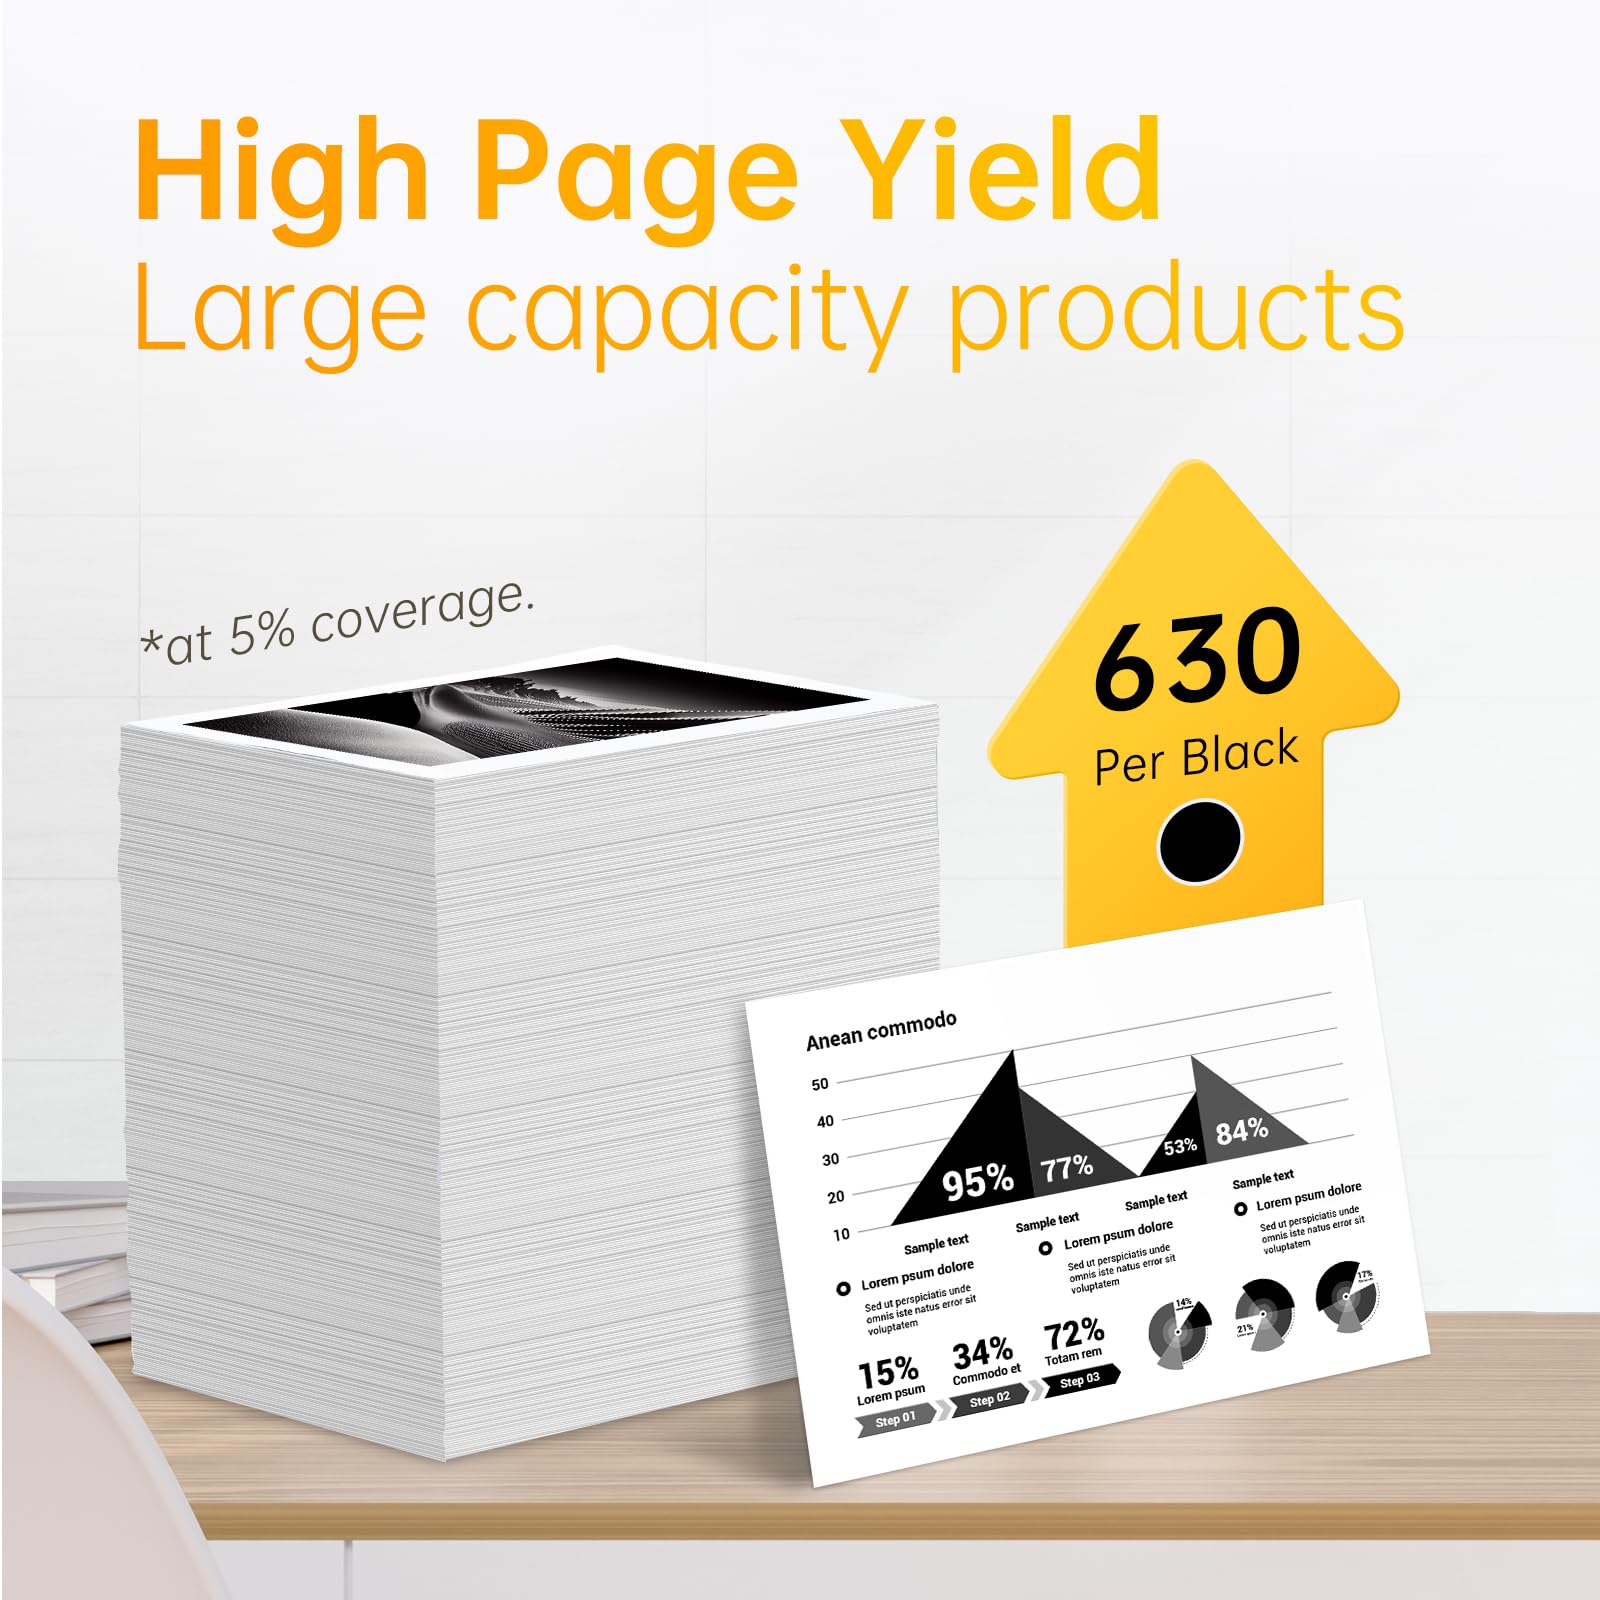 High Page Yield, Large Capacity Products: LEMERO 240XL ink cartridges showing a large stack of printed papers and pie charts, indicating up to 630 pages at 5% coverage.